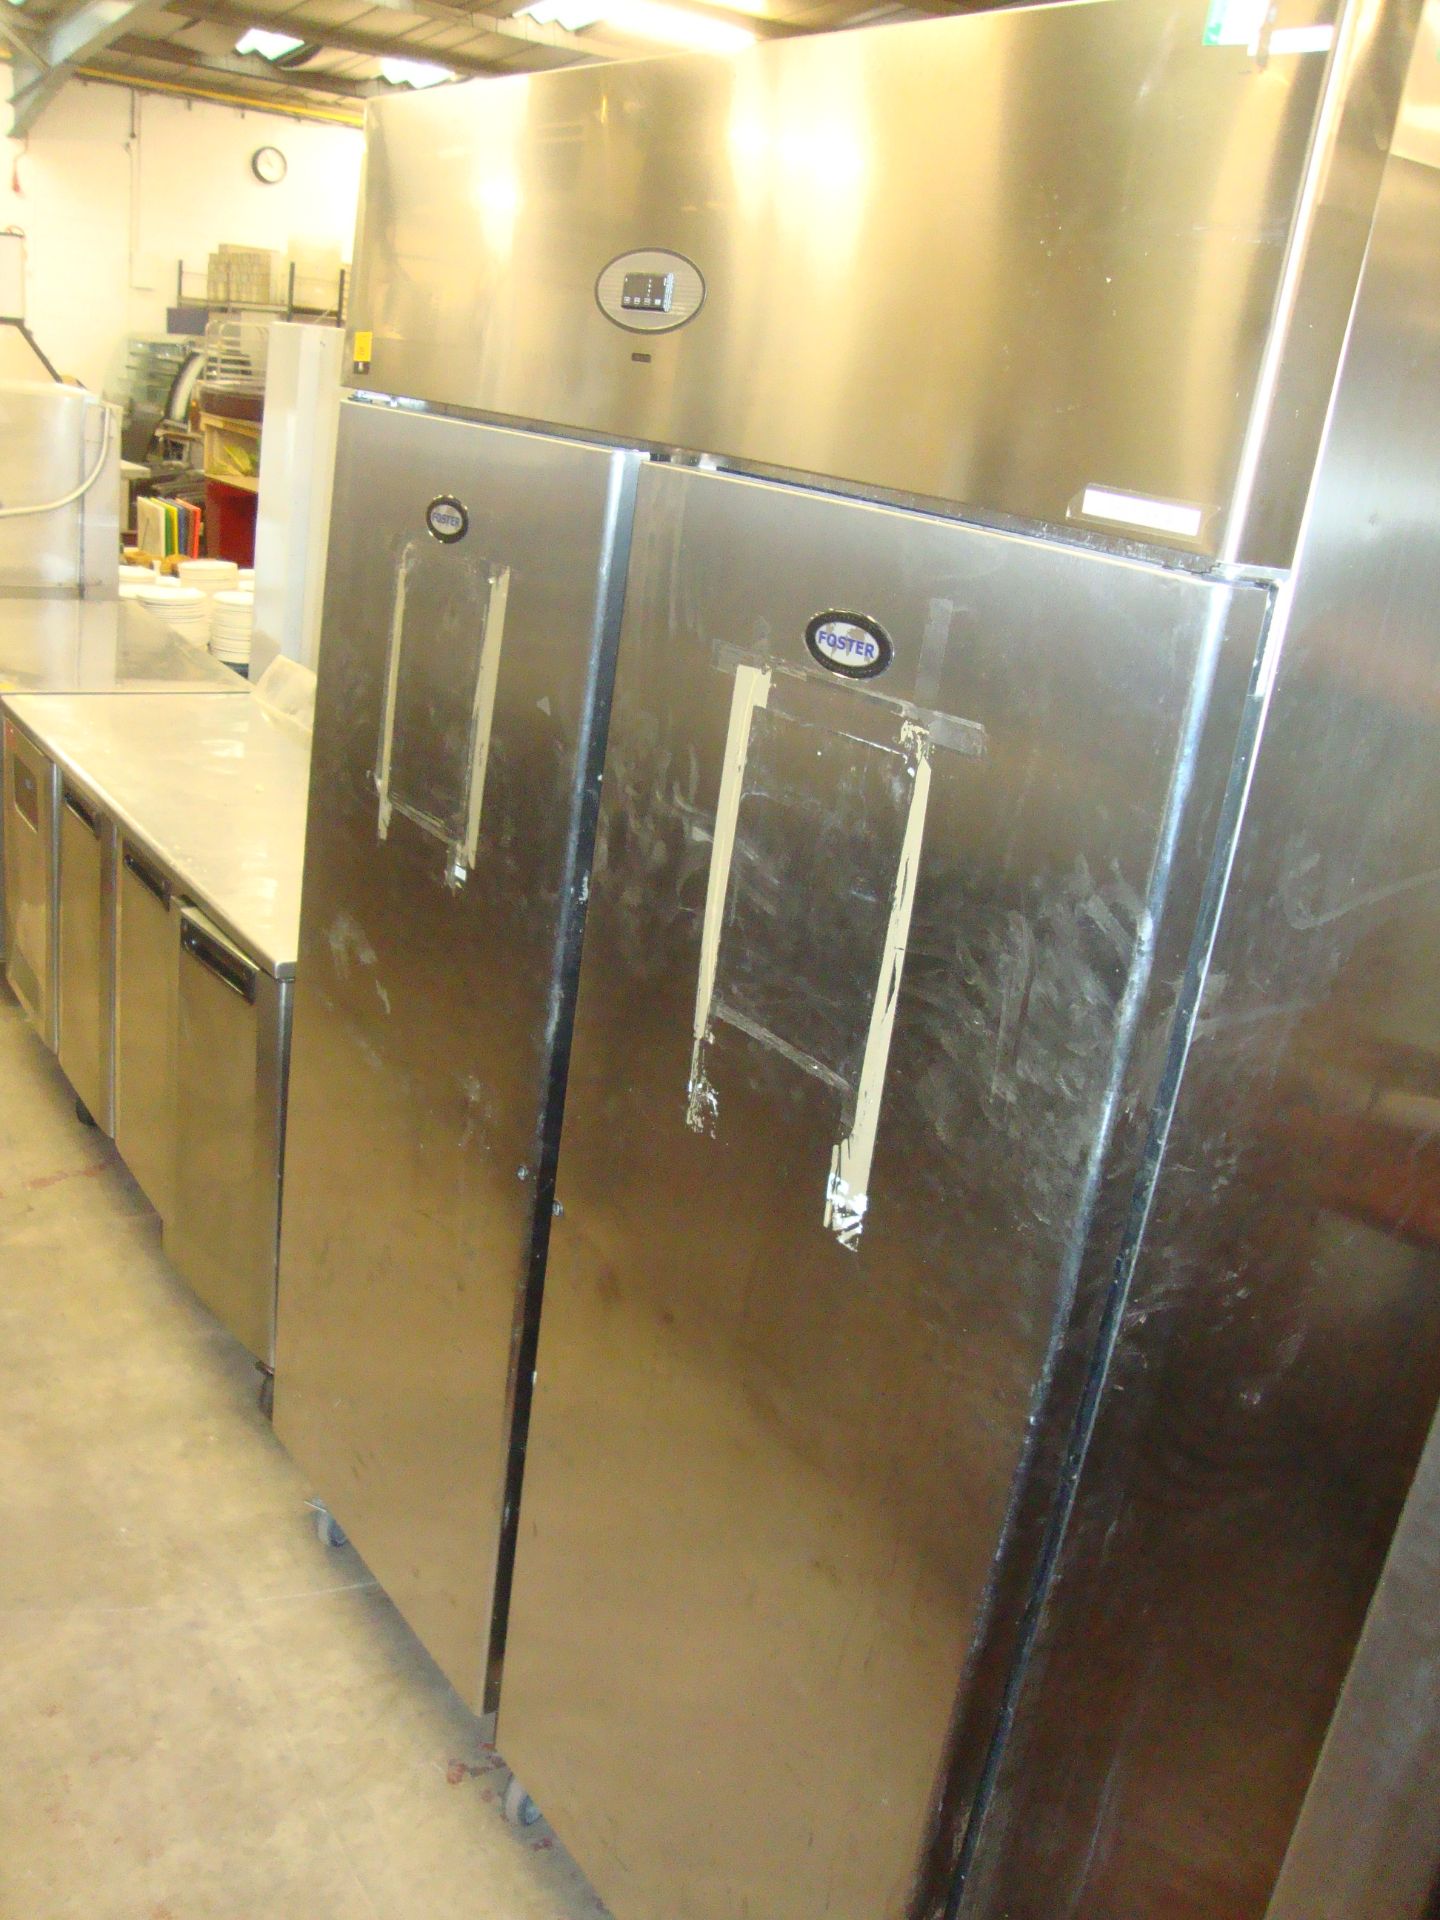 Foster large stainless steel mobile twin door freezer, model PROG1350L-A - Image 2 of 5